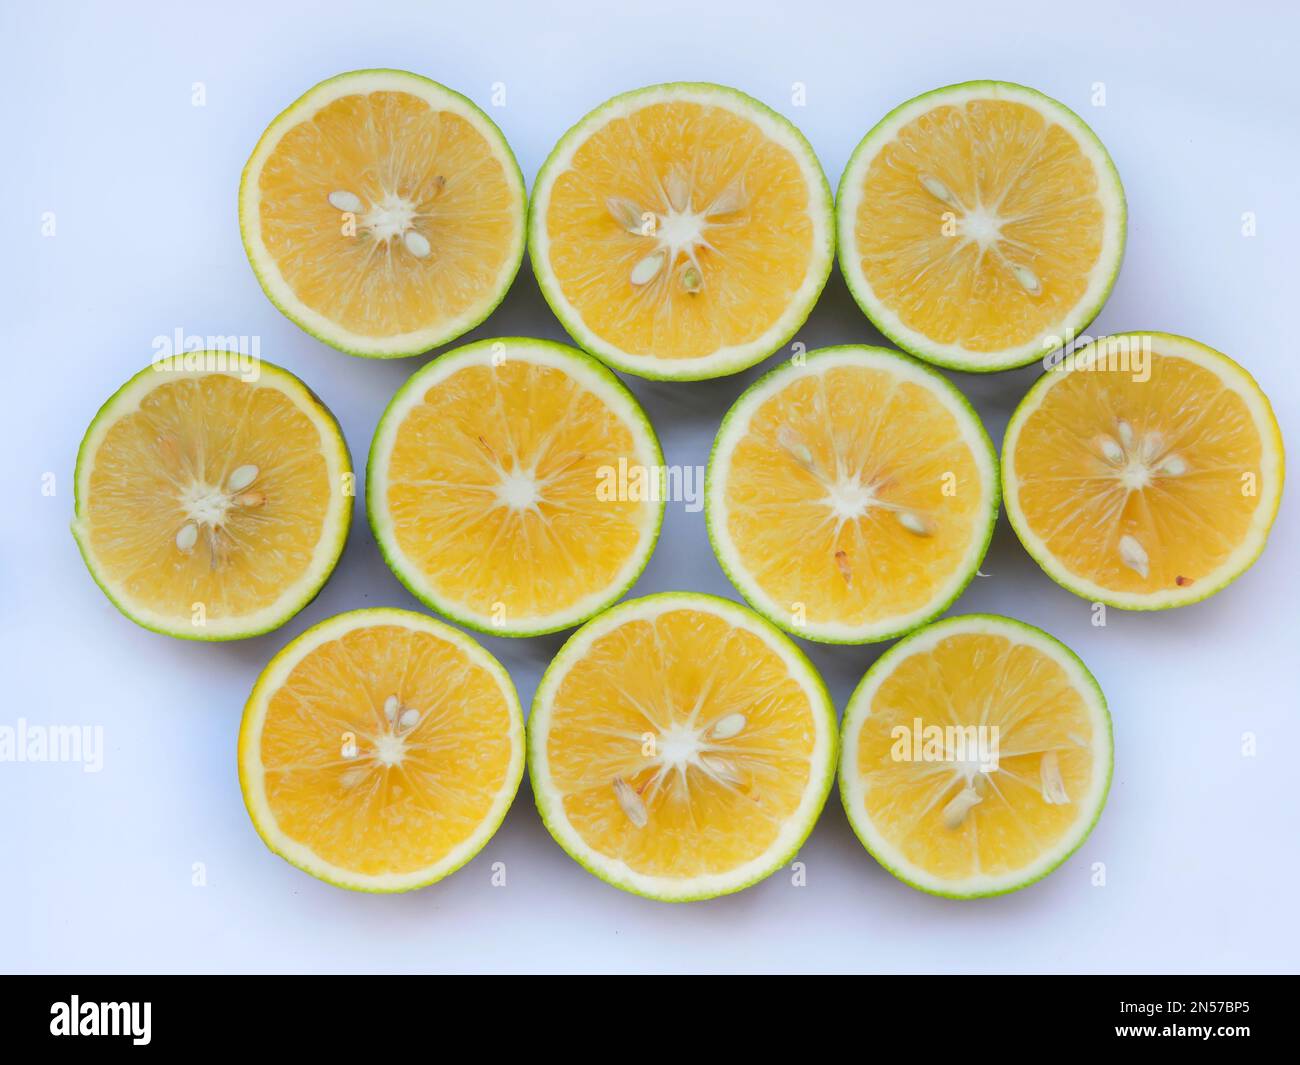 Sweet Lemon is a species of citrus which is commonly known as Mousambi in India. It is a cross between the citron and a bitter orange. Stock Photo